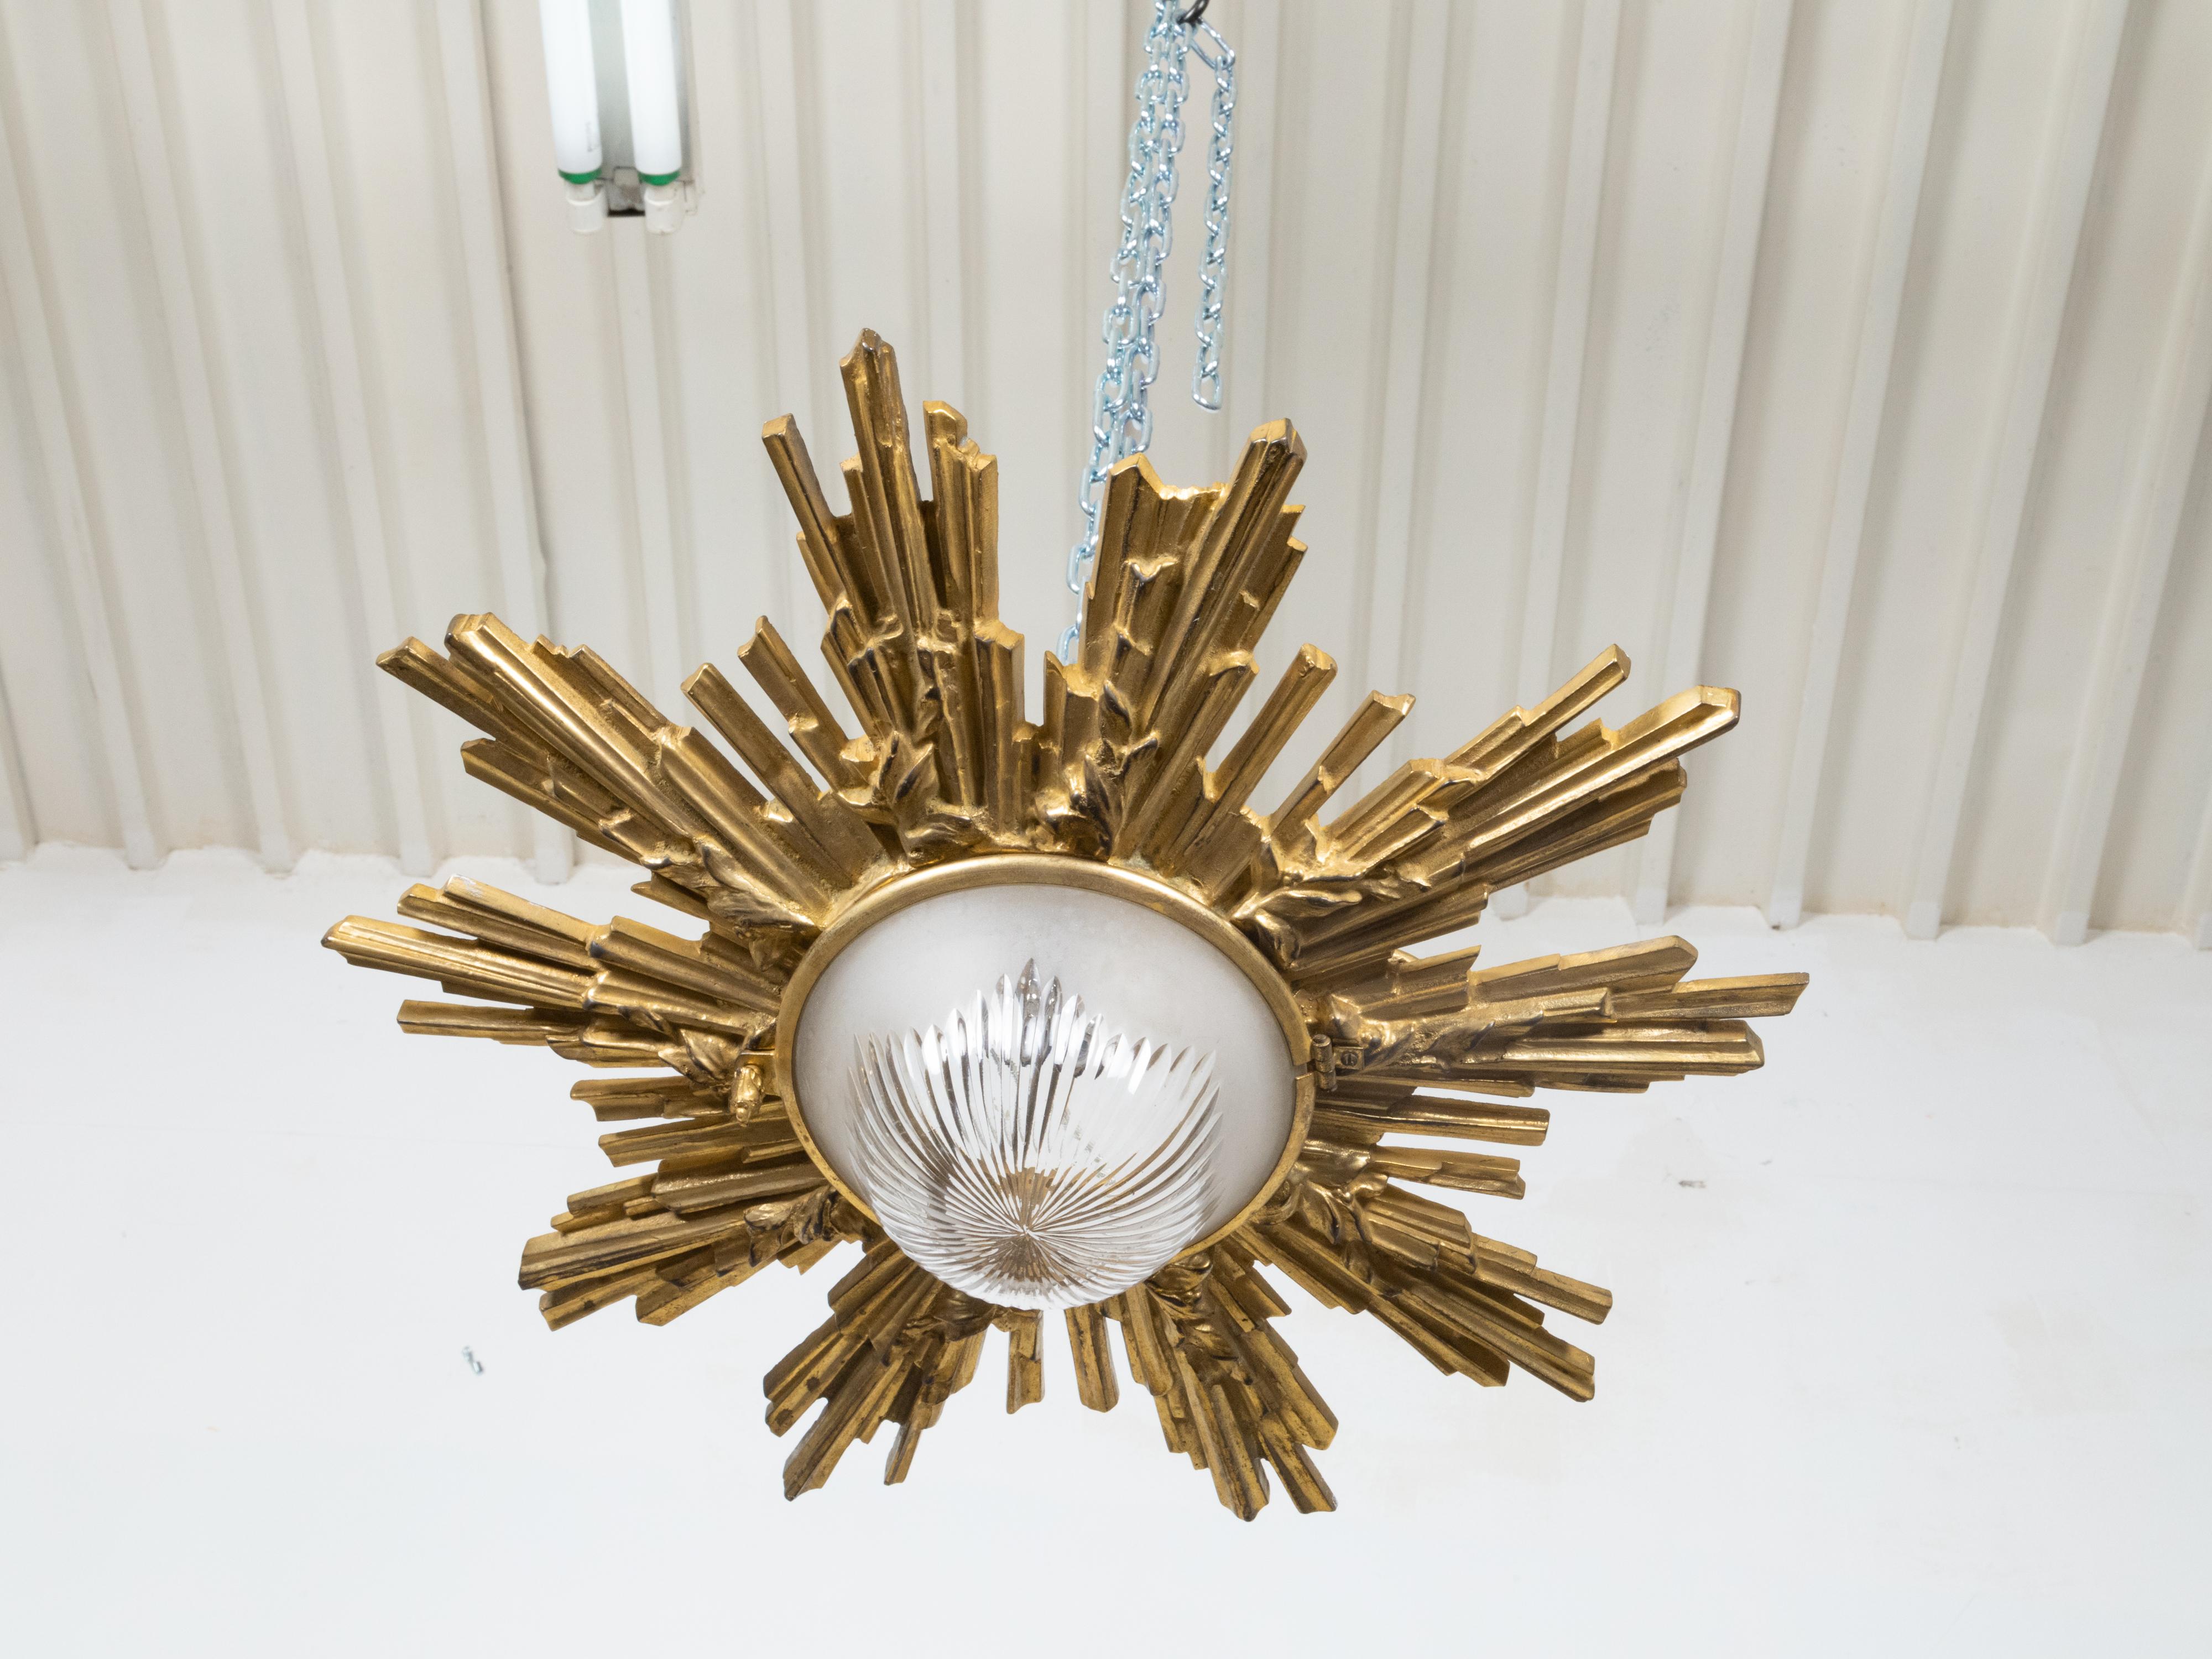 Pair of Gilt Bronze Midcentury Sunburst Light Fixtures with Frosted Glass For Sale 3